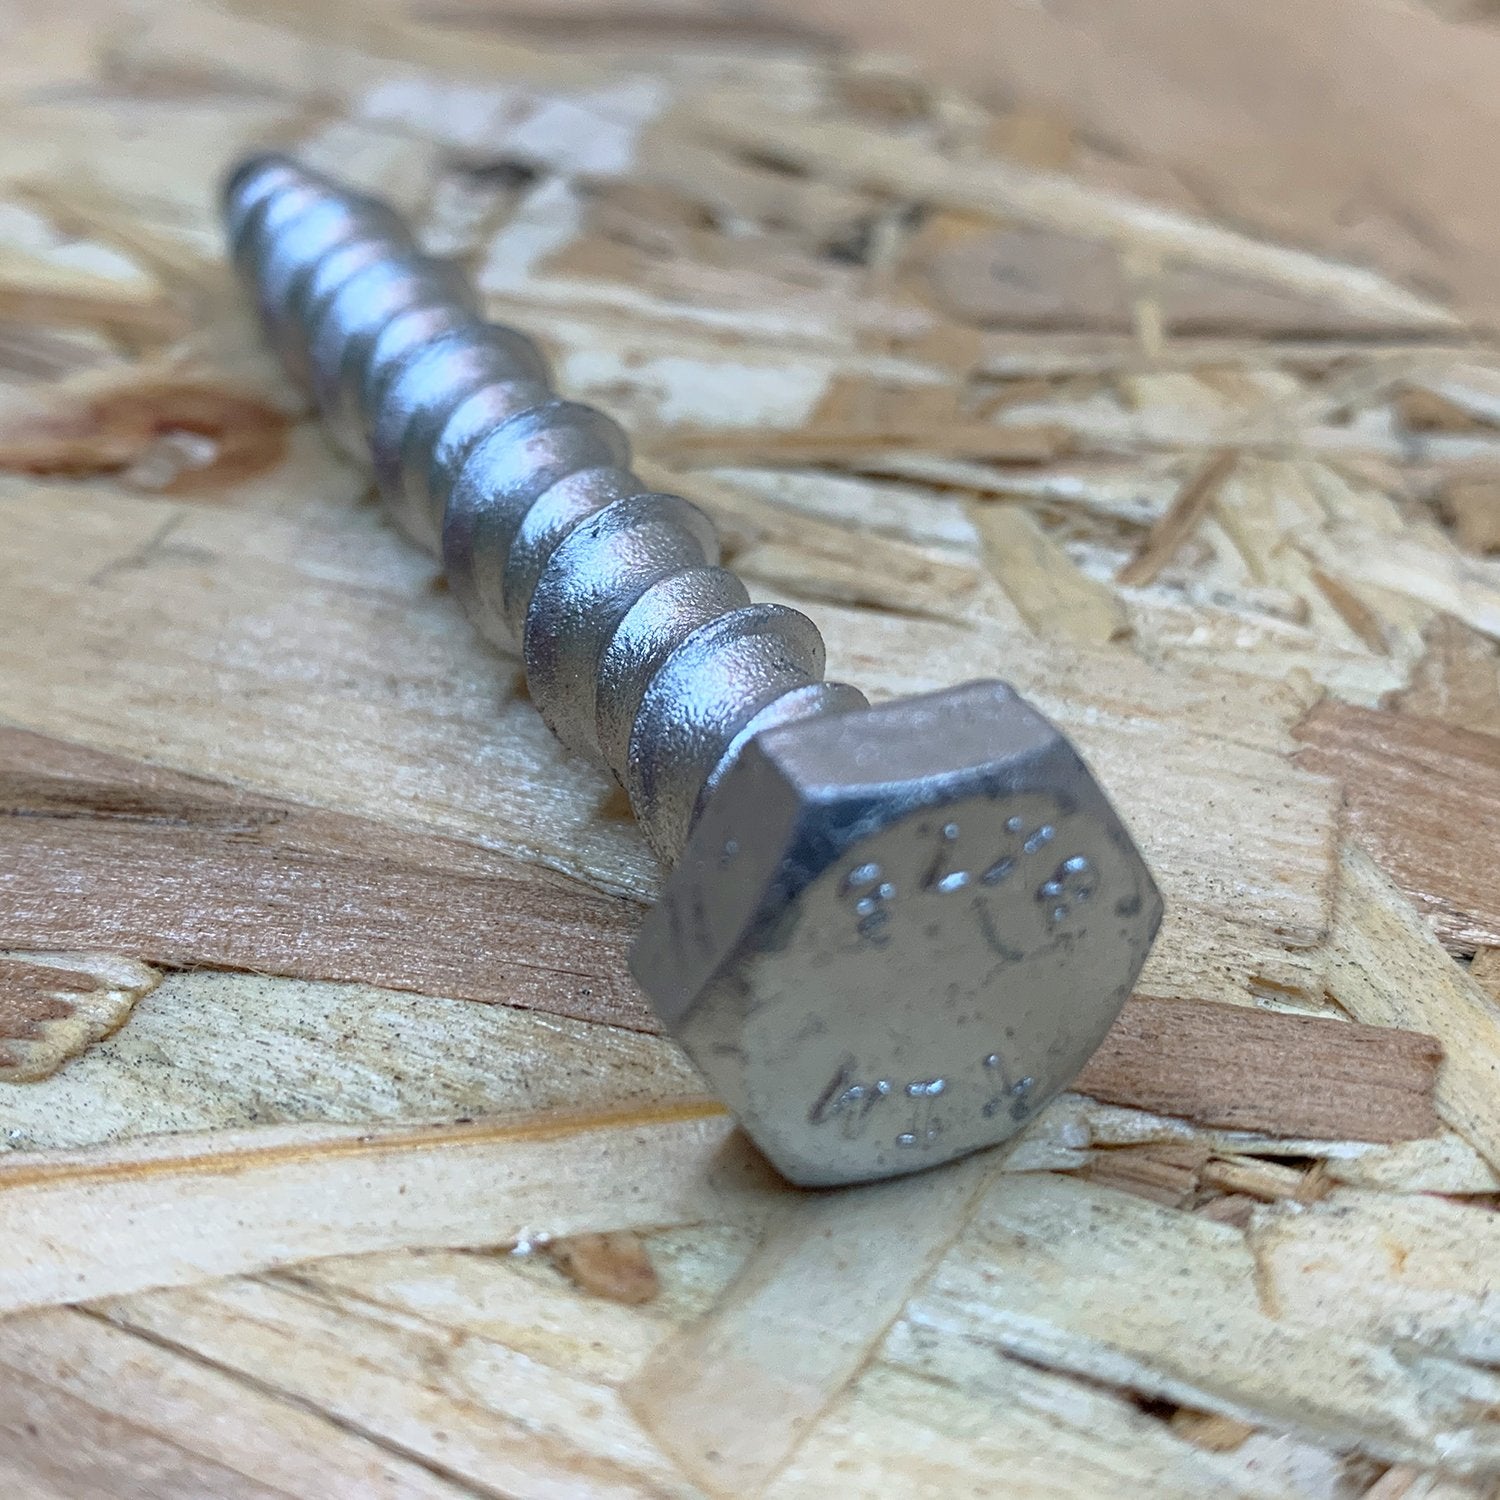 Silver Masonry Exterior Bolts Concrete Brick Stone and Wood Screws - Indoor Outdoors